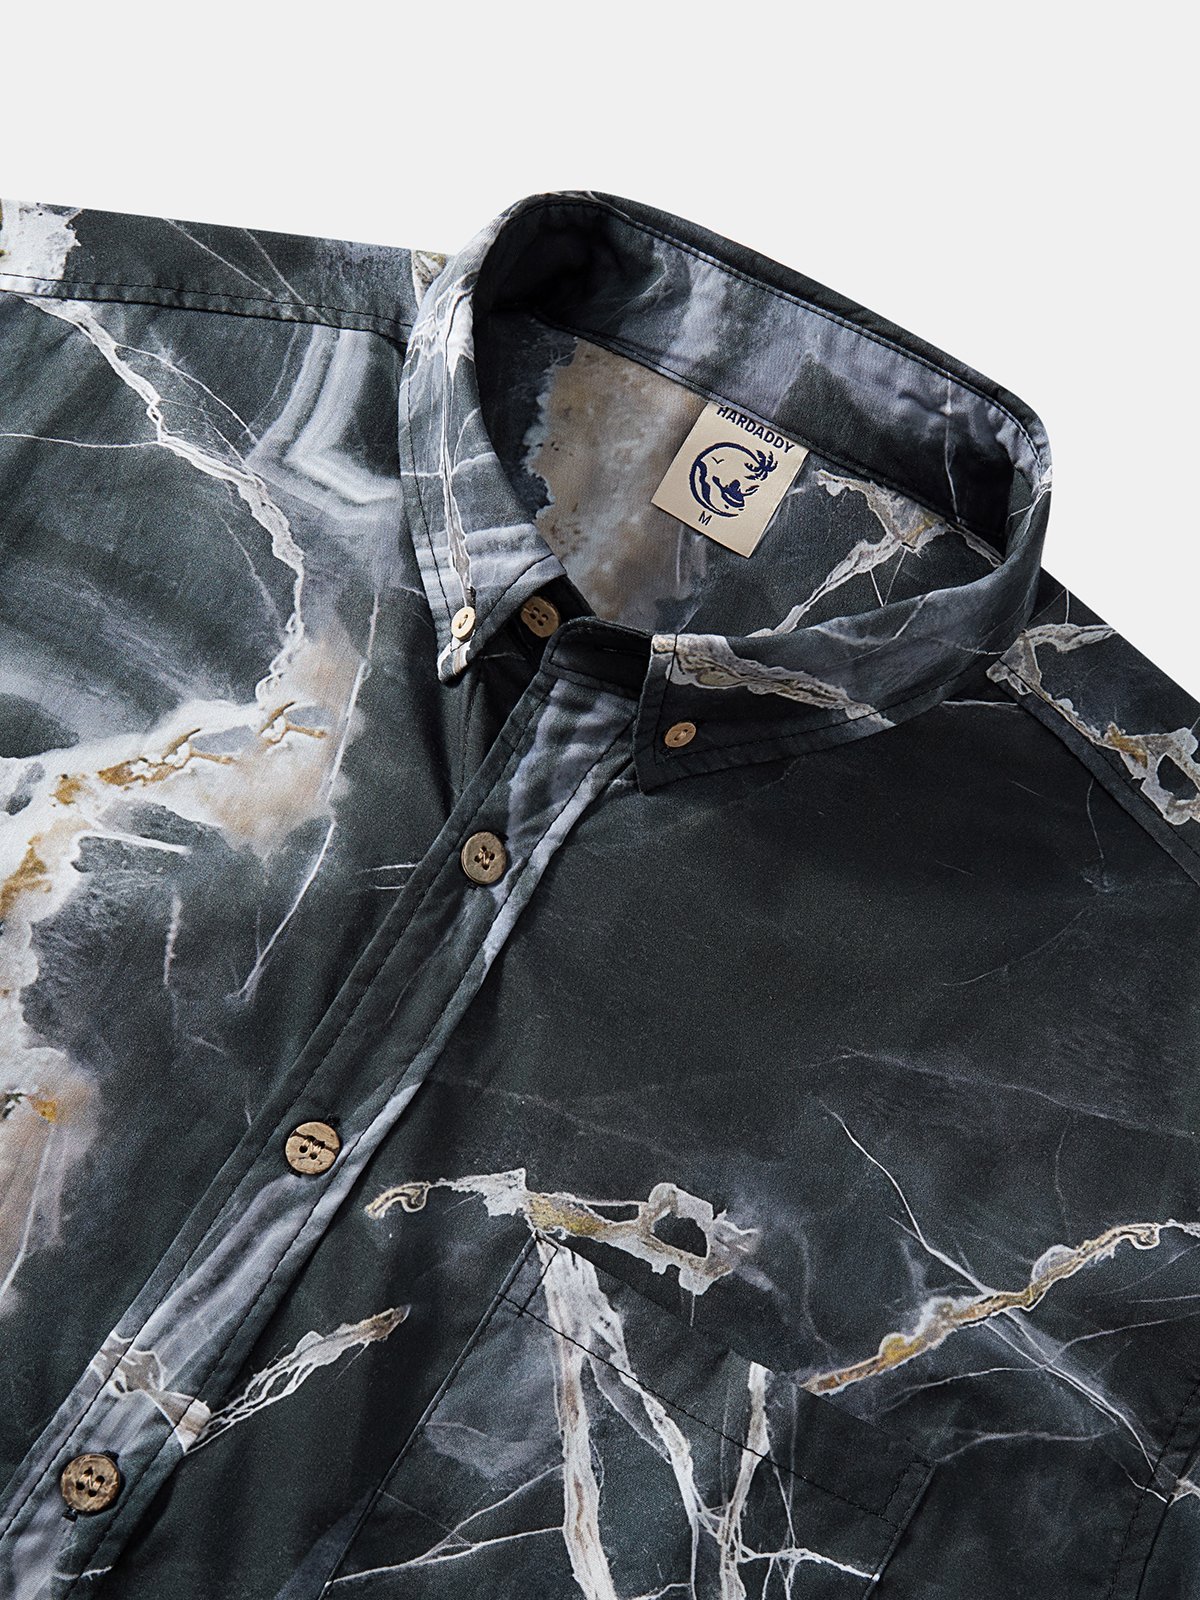 Hardaddy® Cotton Marble Texture Oxford Shirt